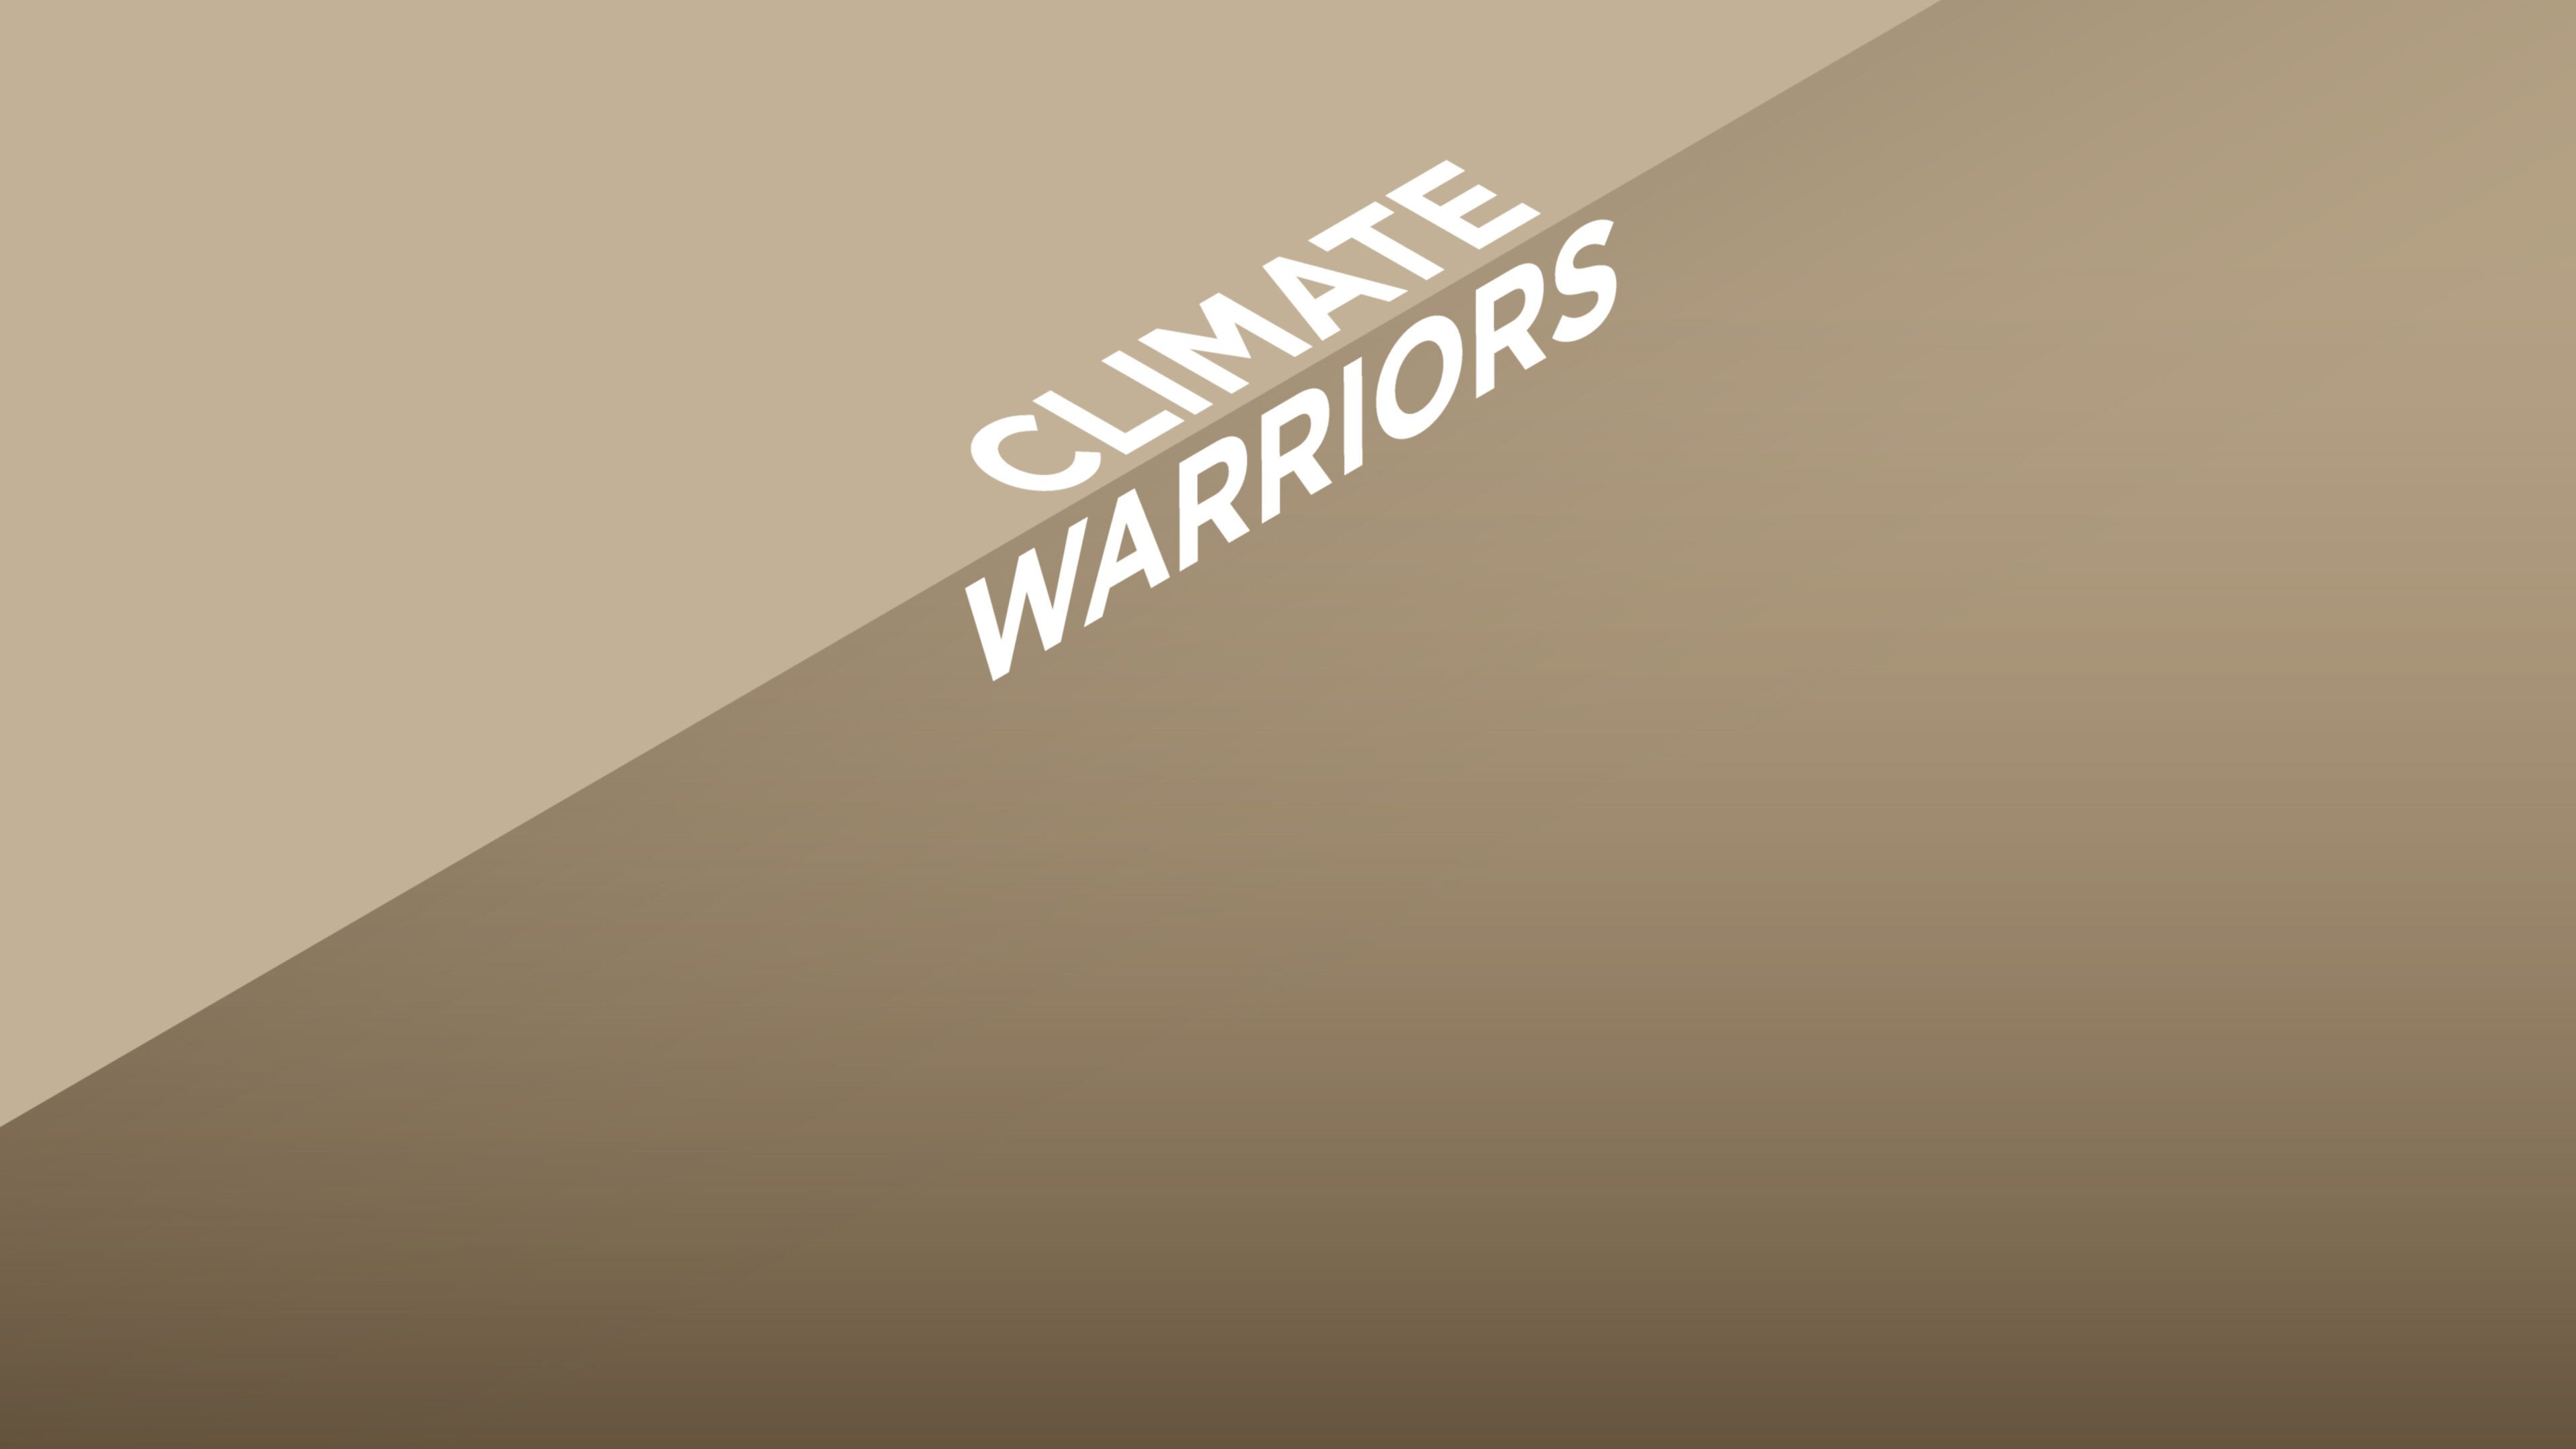 "Climate Warriors" is uppercase, riding along a shadow edge and a full-bleed background.